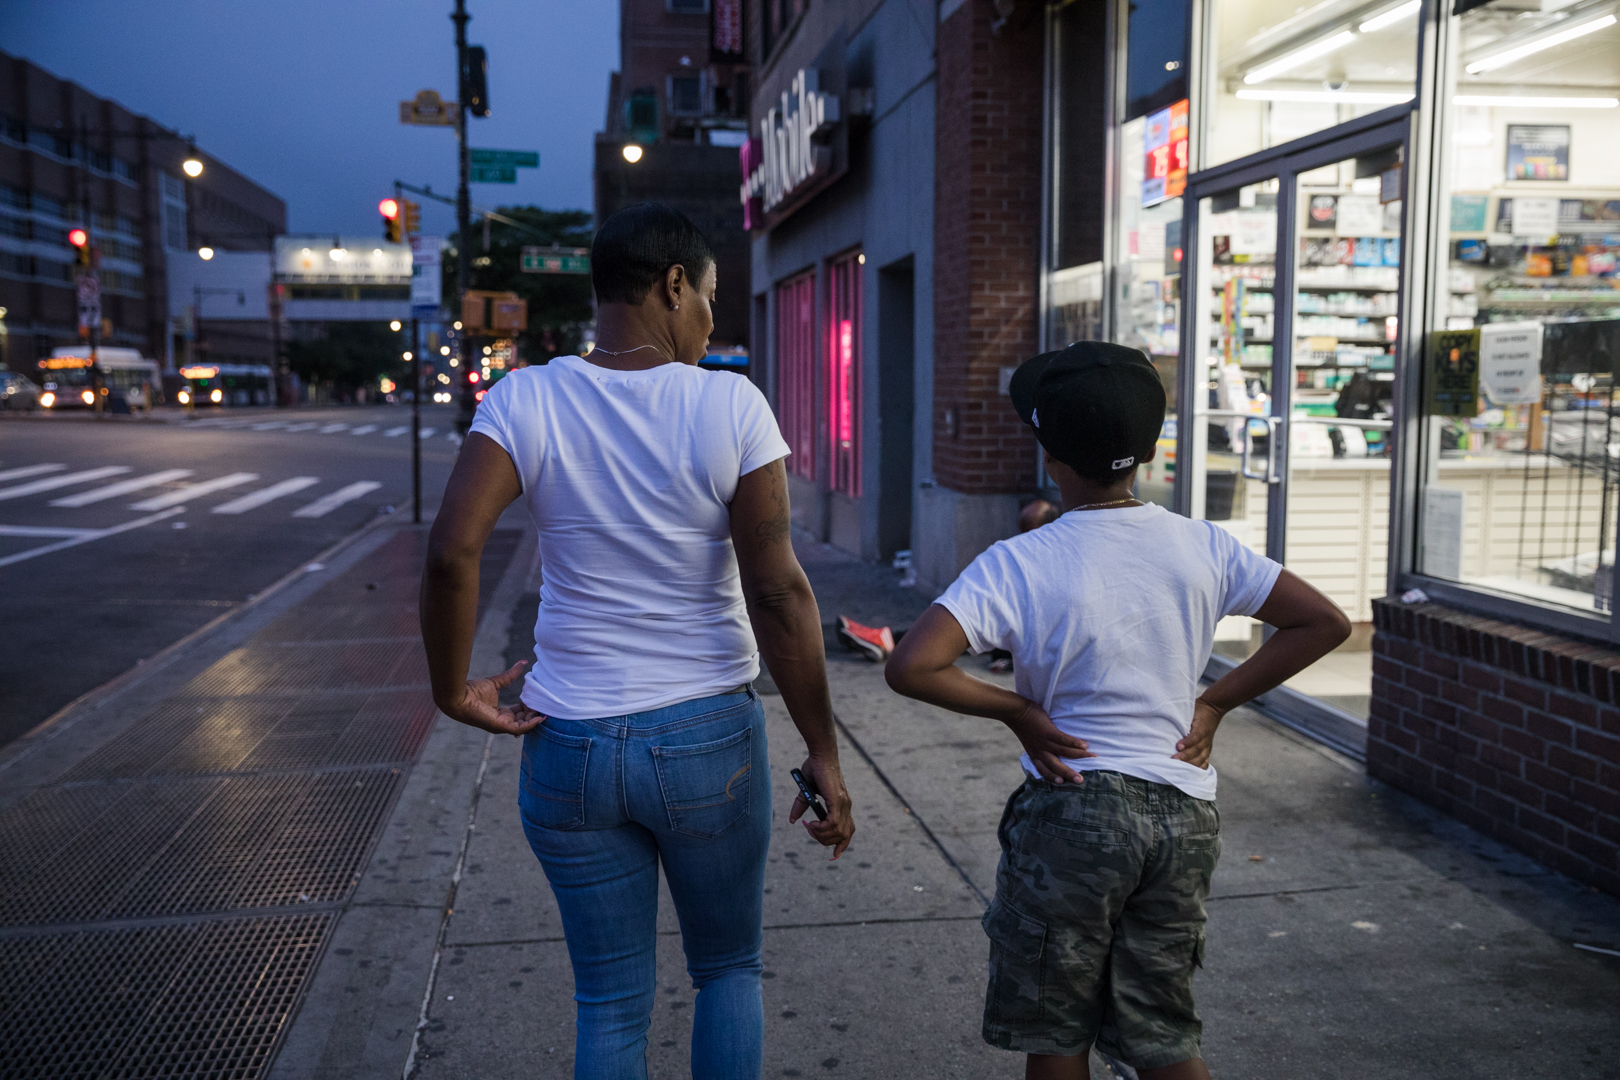 Banks and her son, Isaiah grab breakfast at a 7-Eleven in the Bronx. Eagle photo by Paul Frangipane